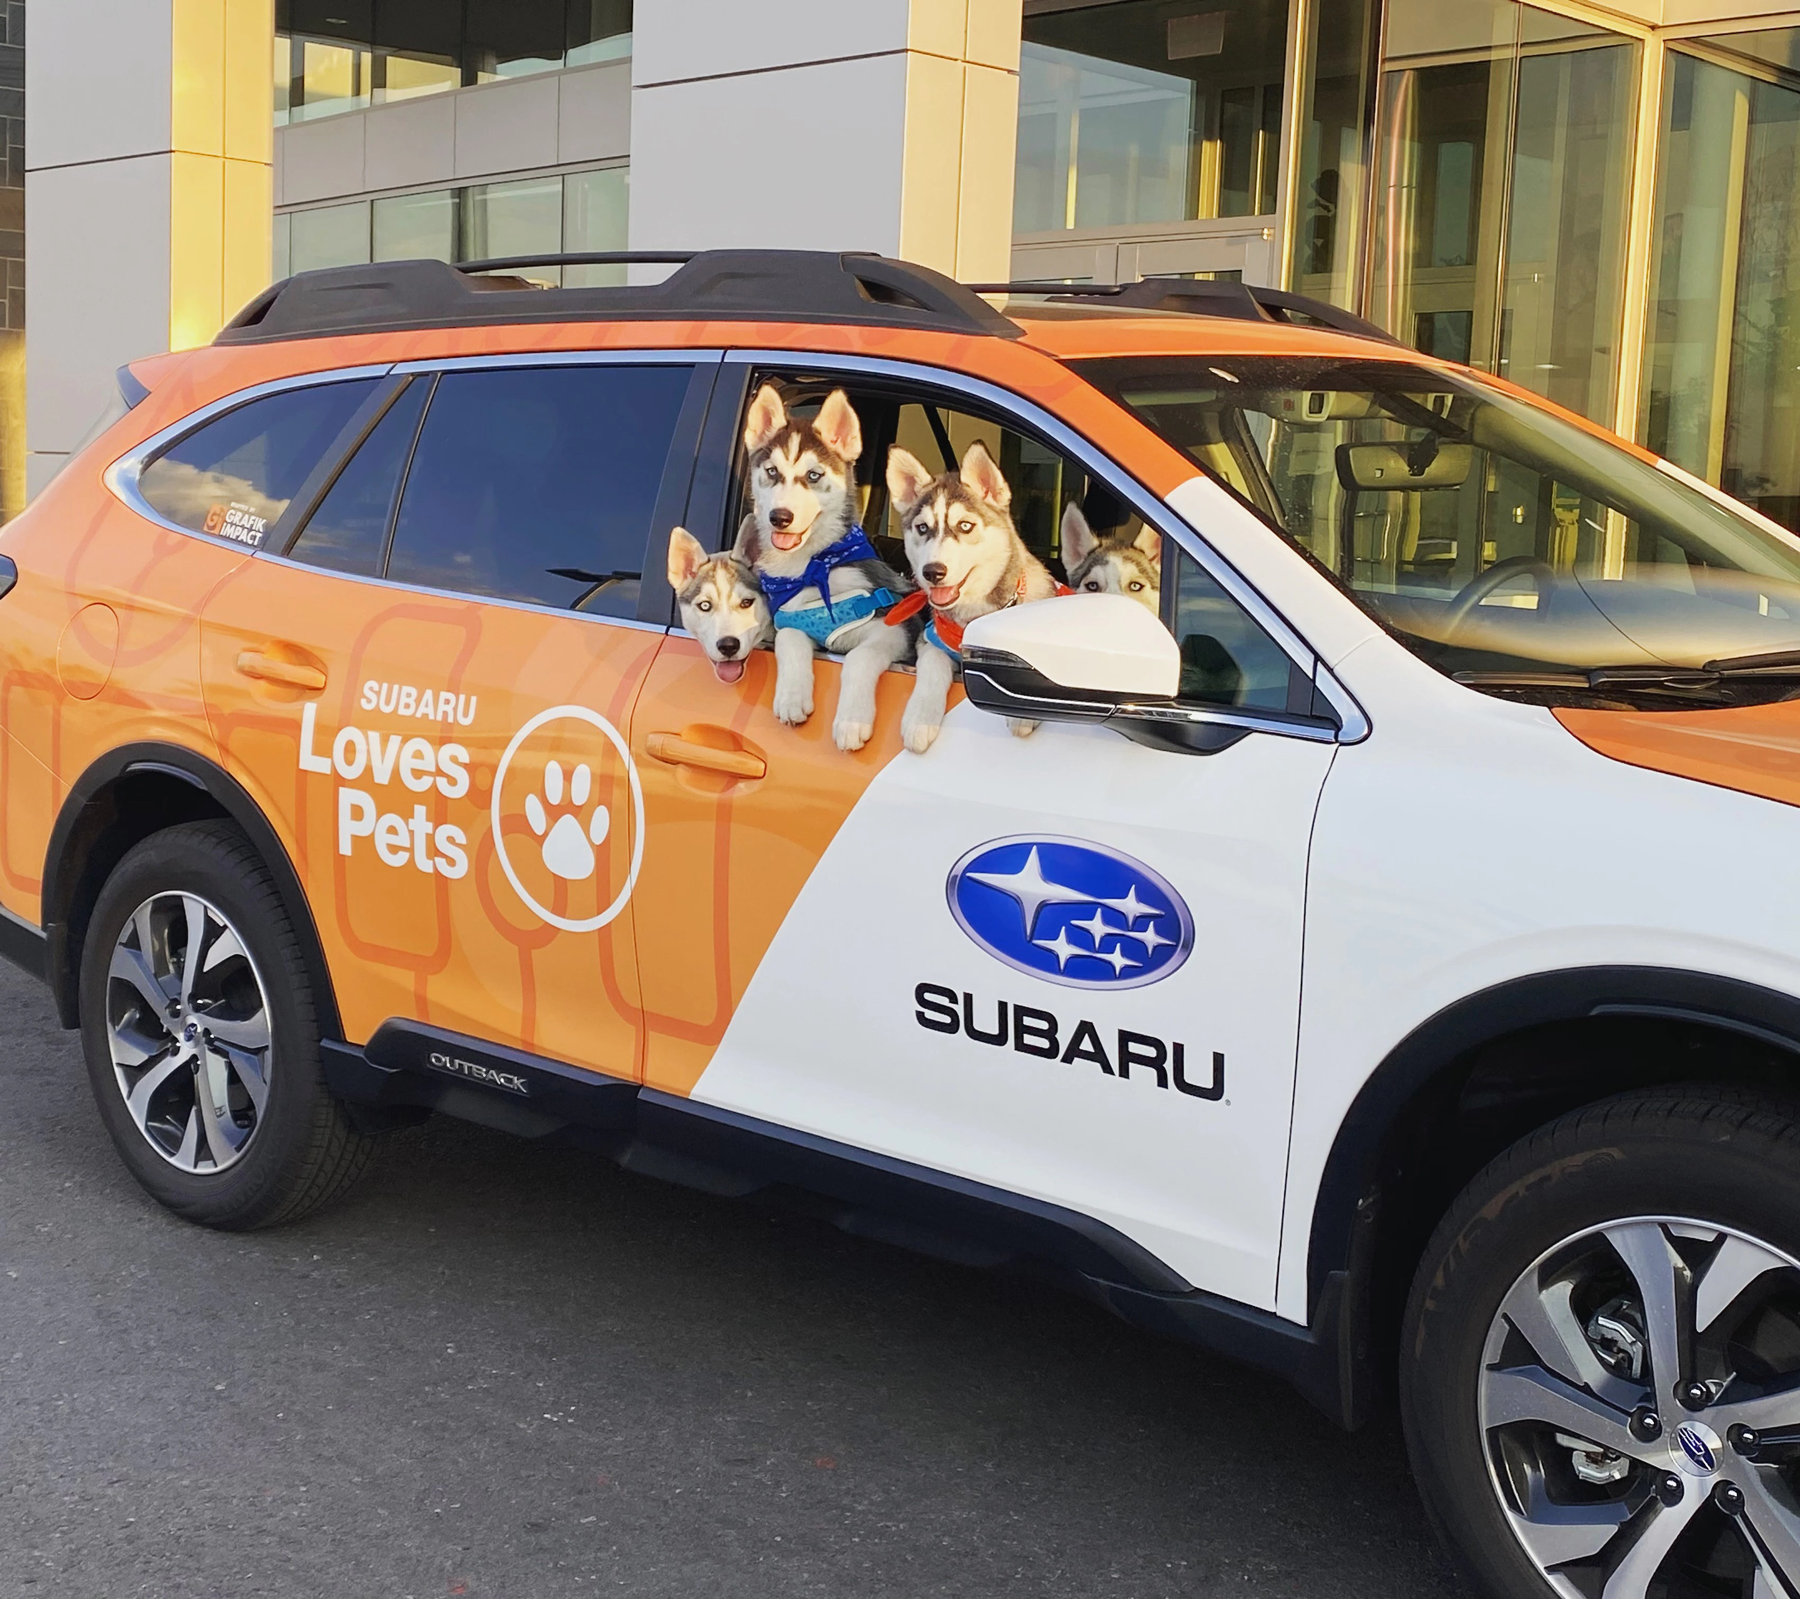 Huskey dogs in a Subaru Loves pet vehicle